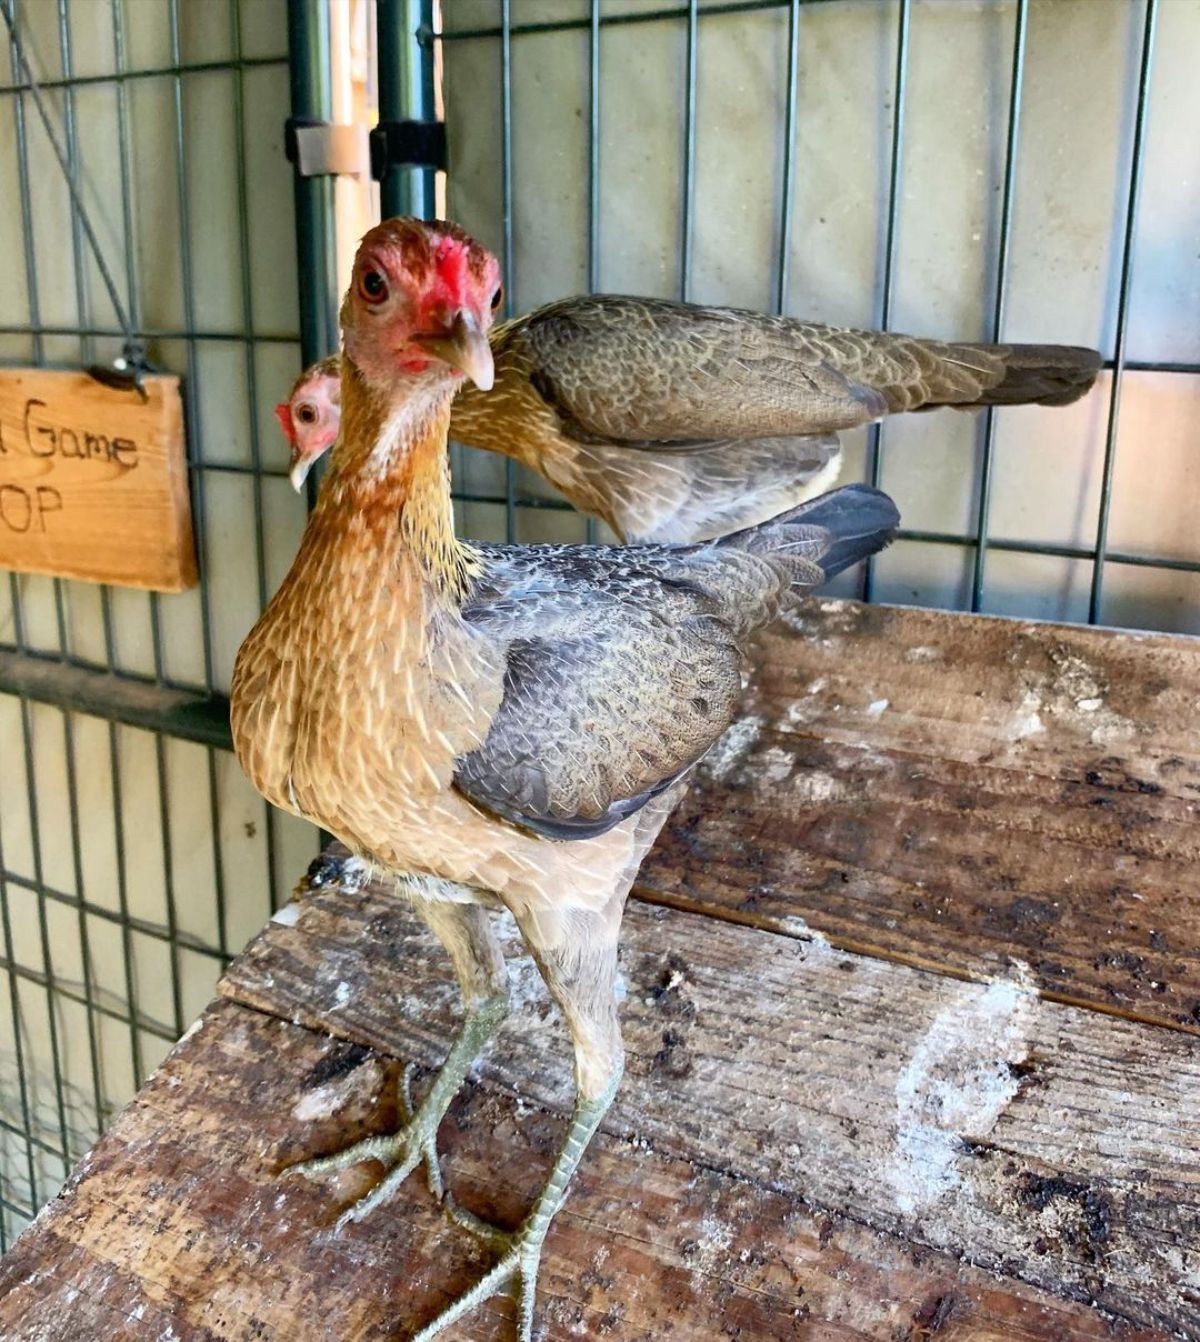 Two adorable Modern Game hens in a chicken coop.